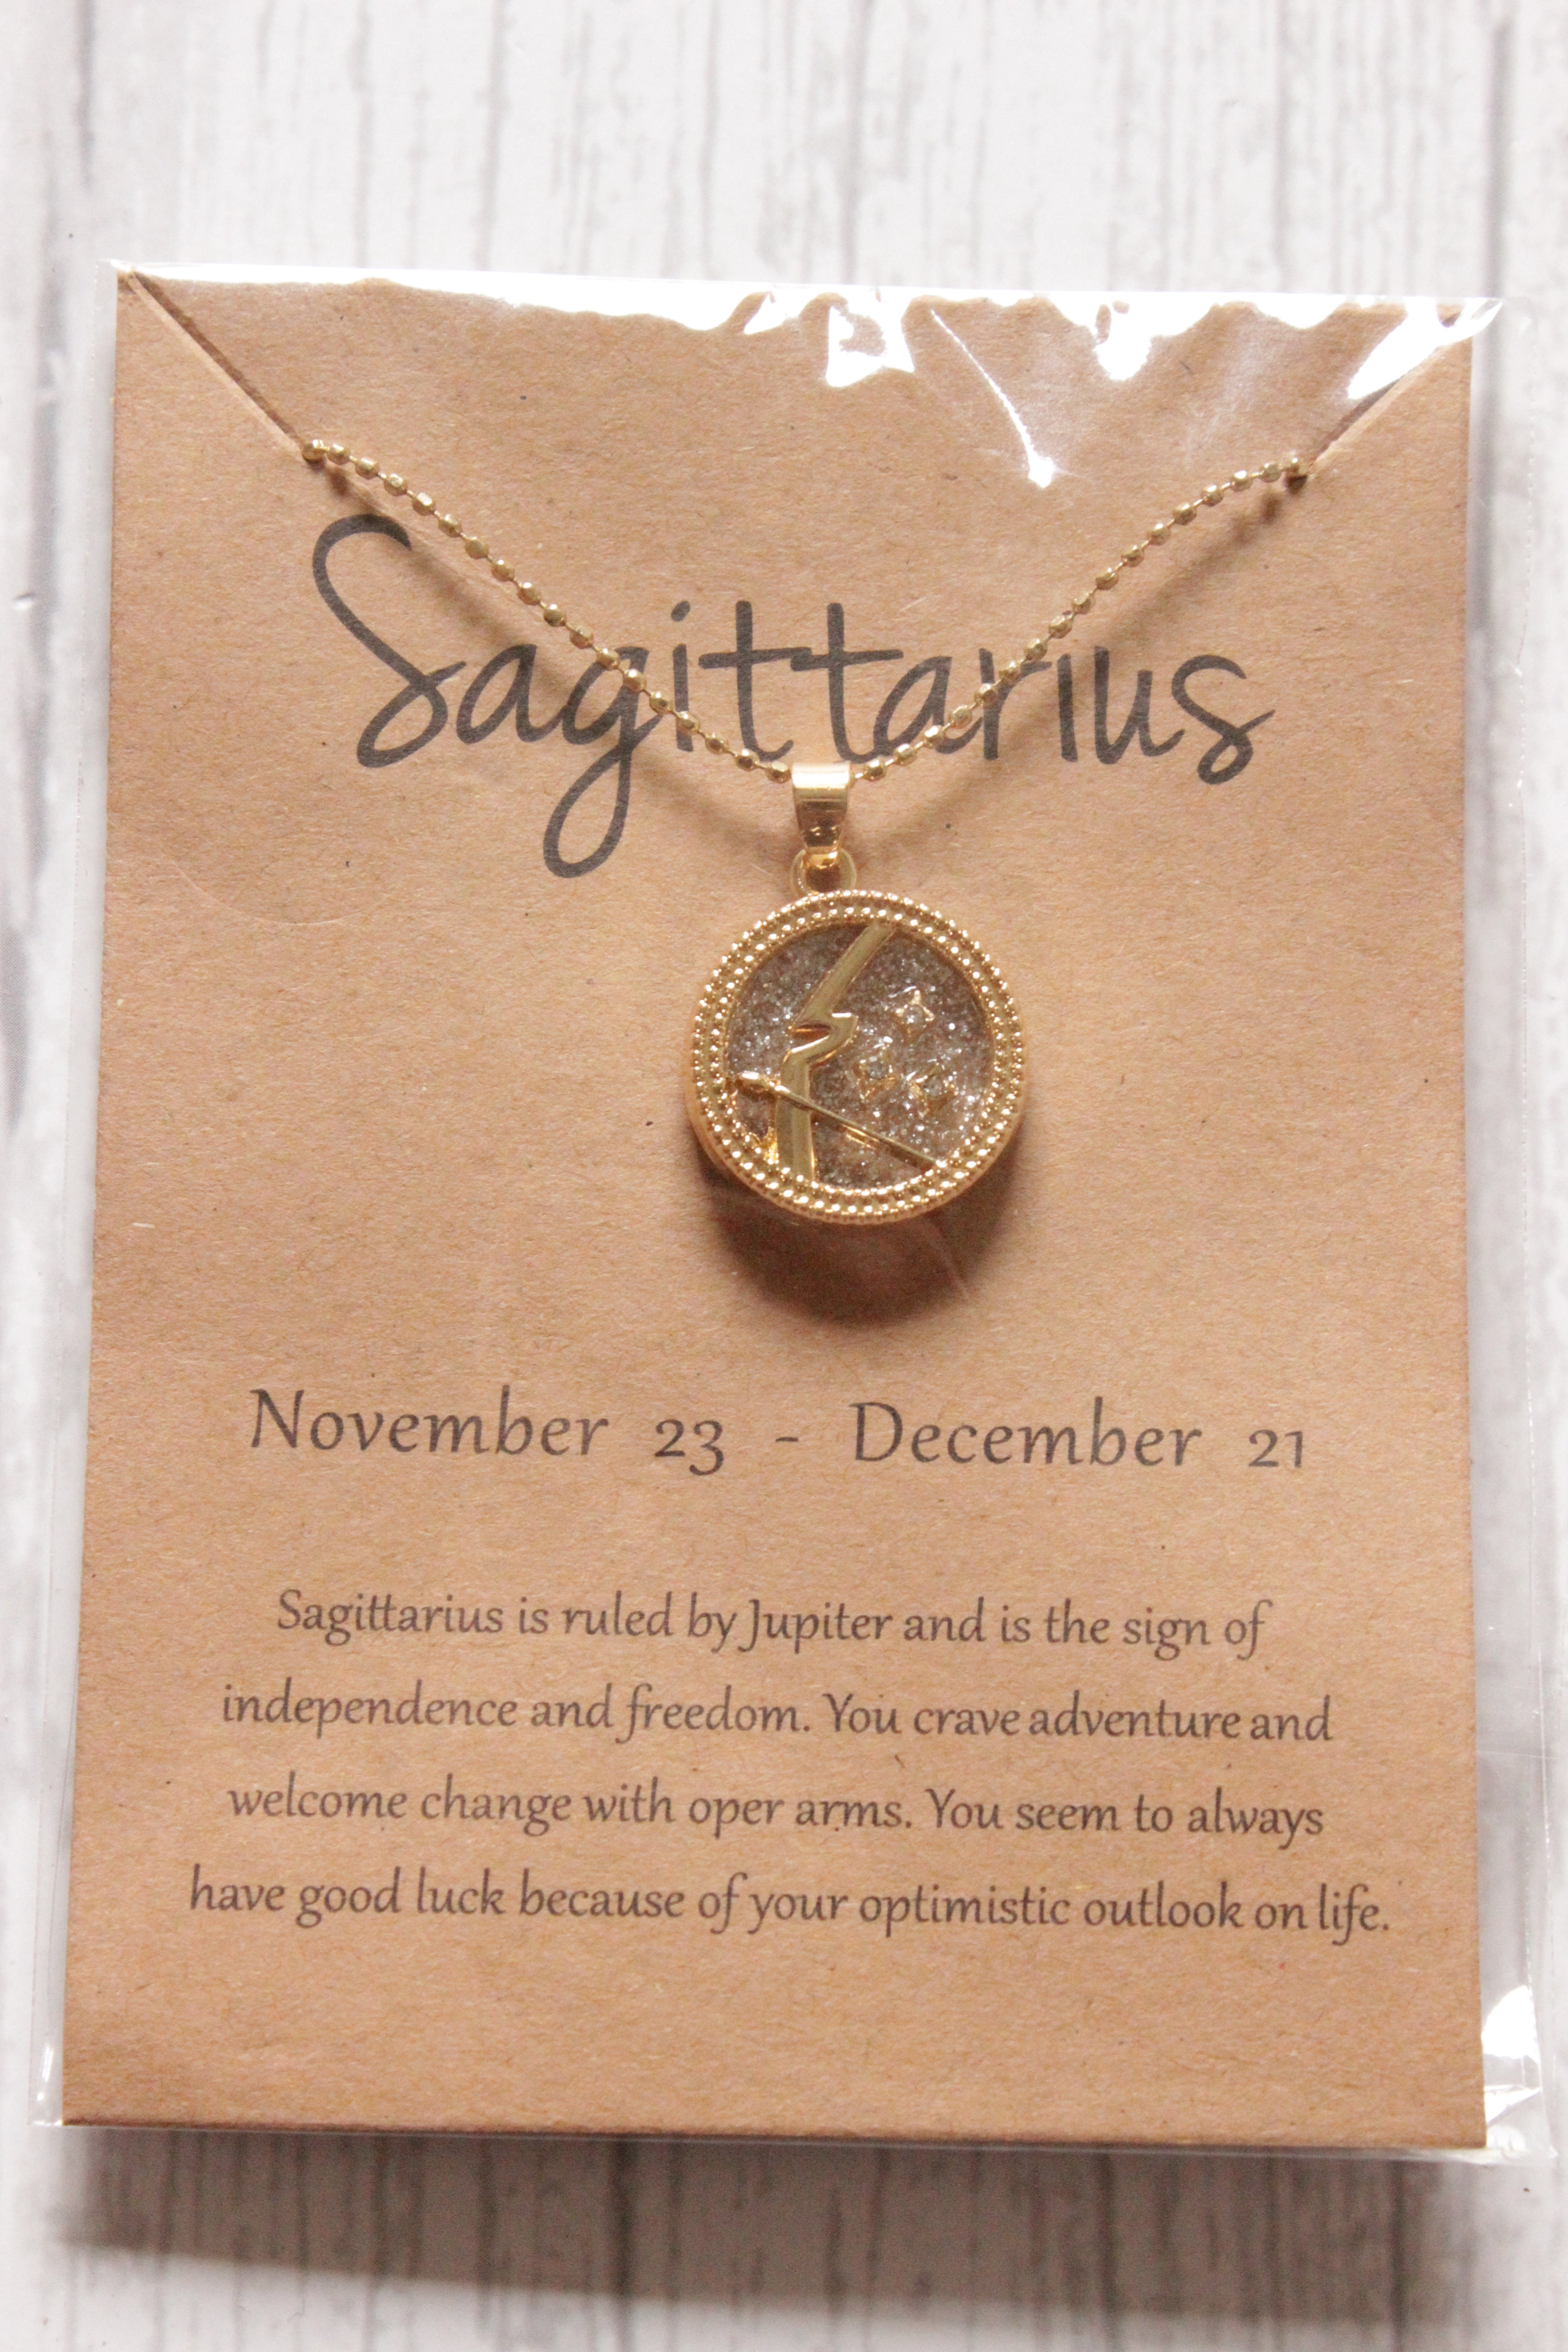 Sagittarius Sun Sign Gold Plated Day Style Round Resin Horoscope Astrology Minimalist Pendant Necklace with Card